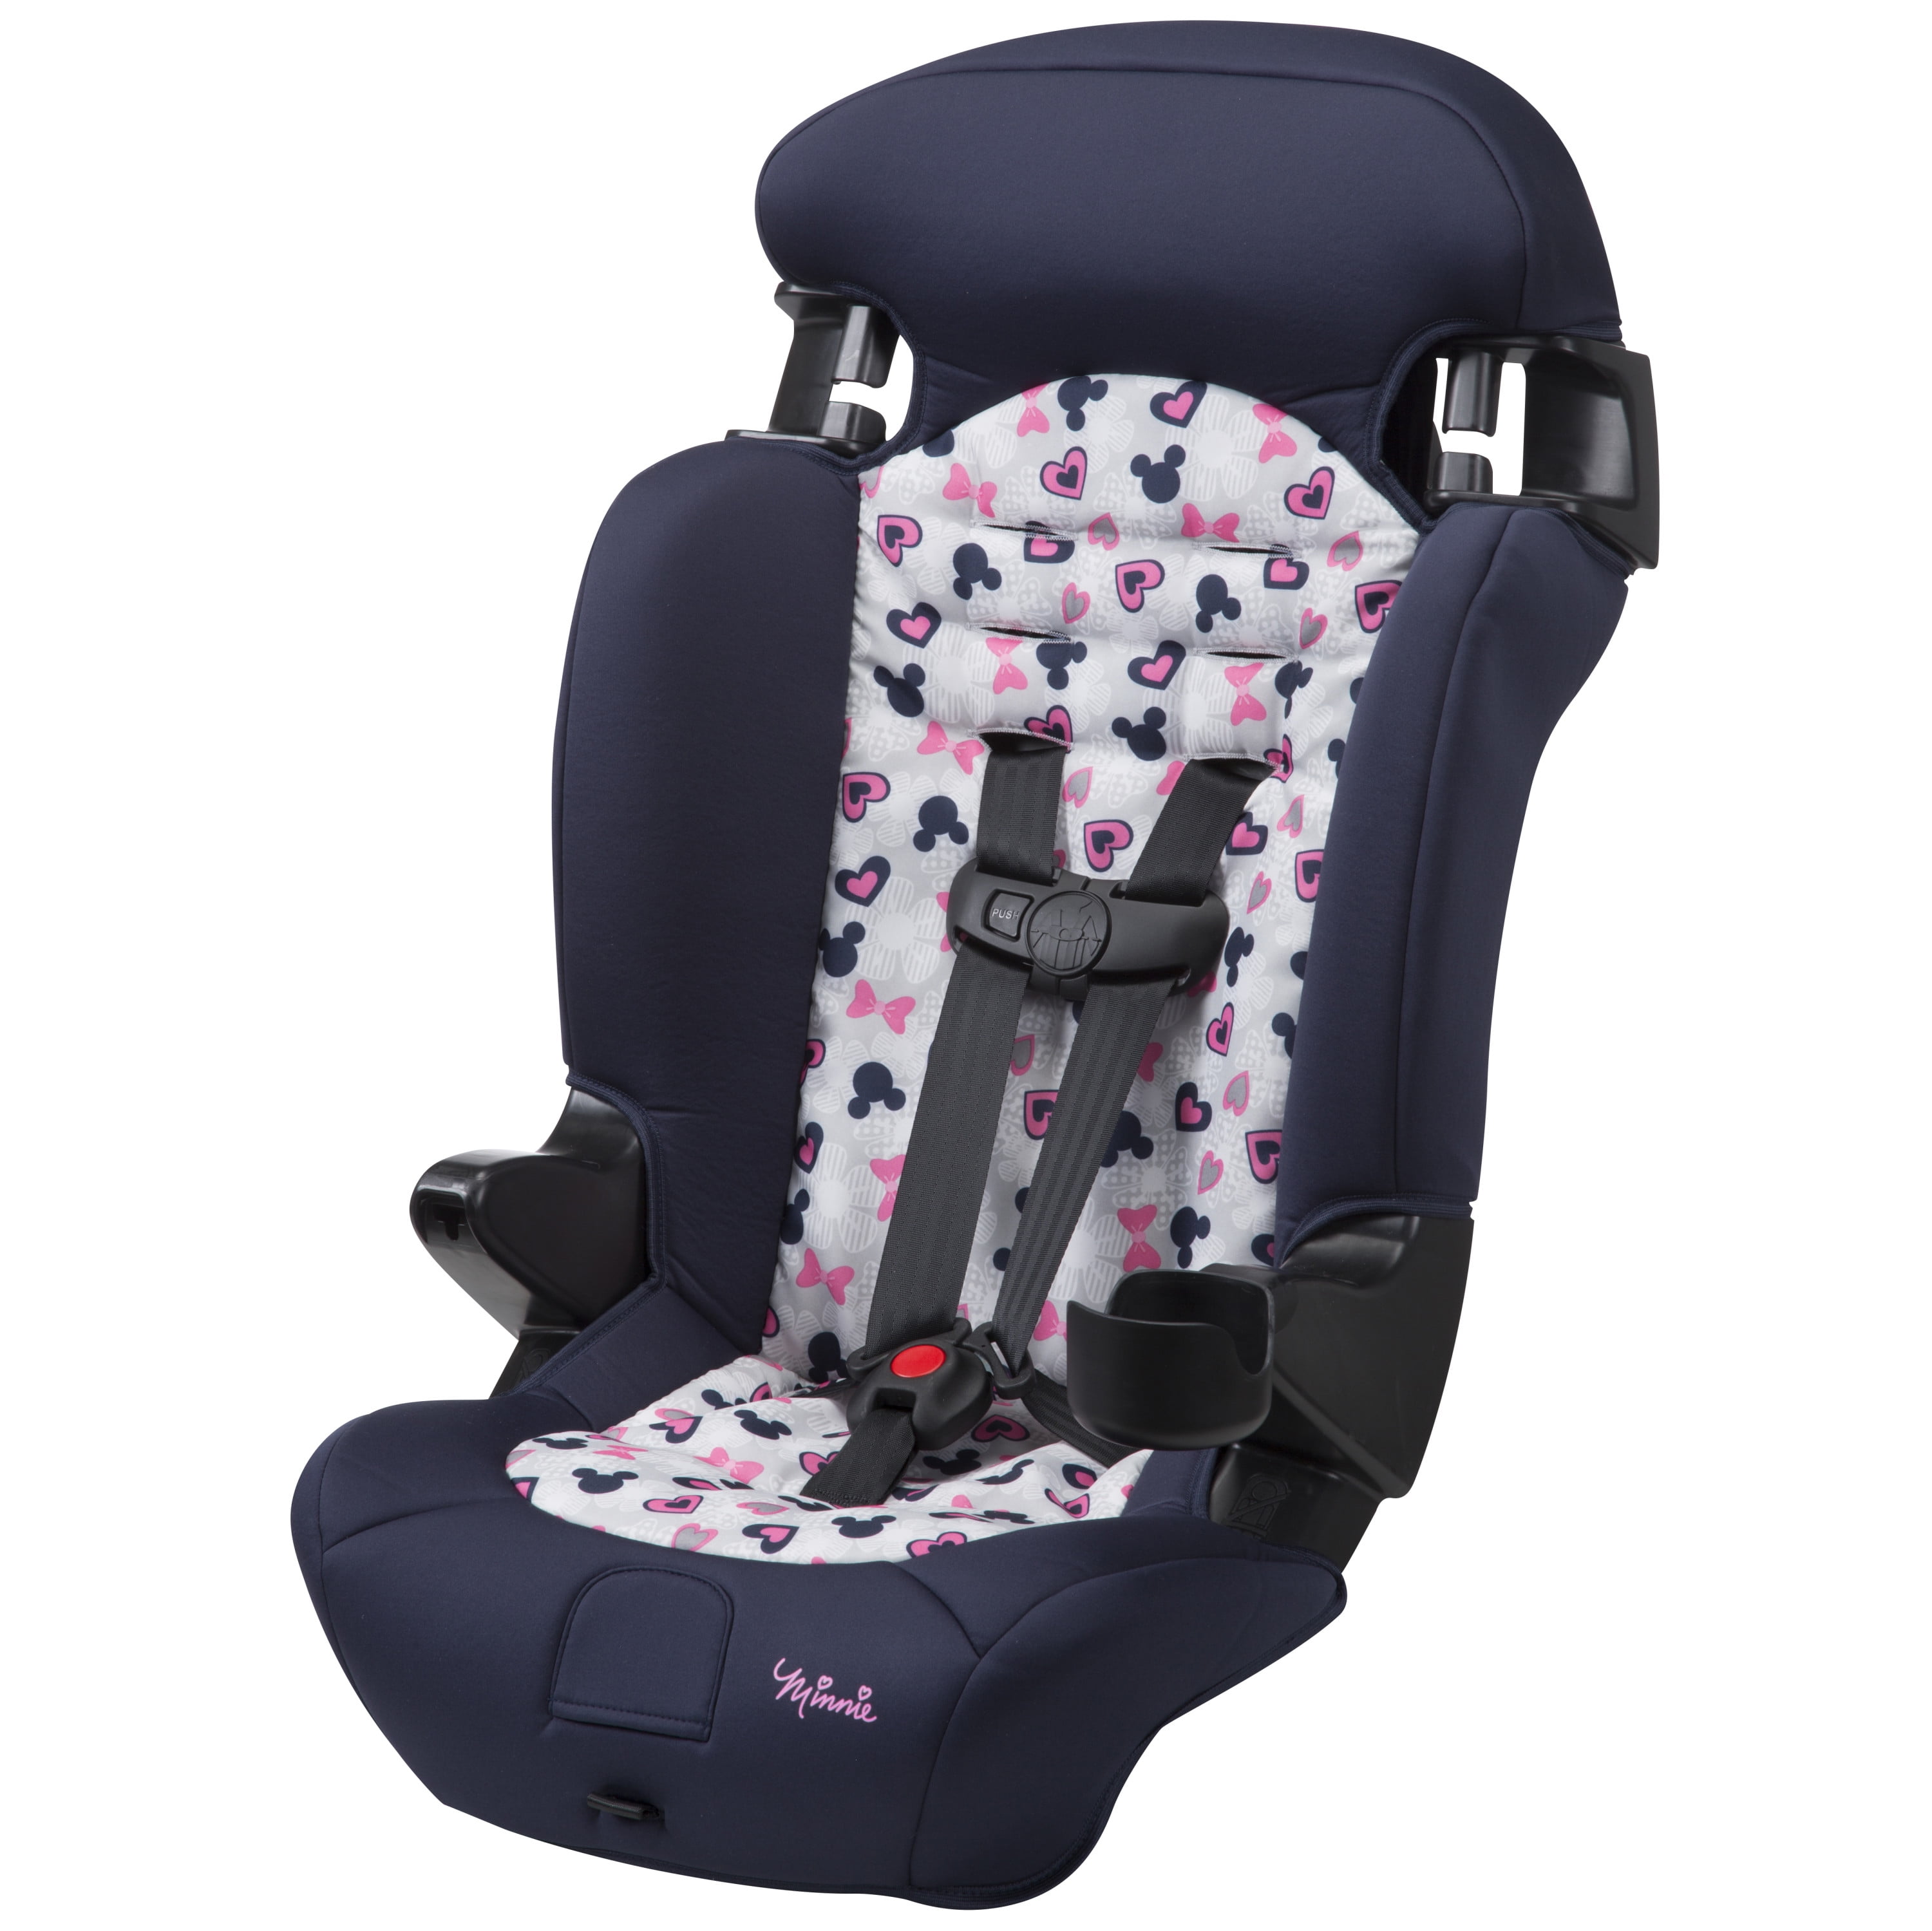 Disney Baby Finale 2-in-1 Booster Car Seat, Minnie's Favorite Things